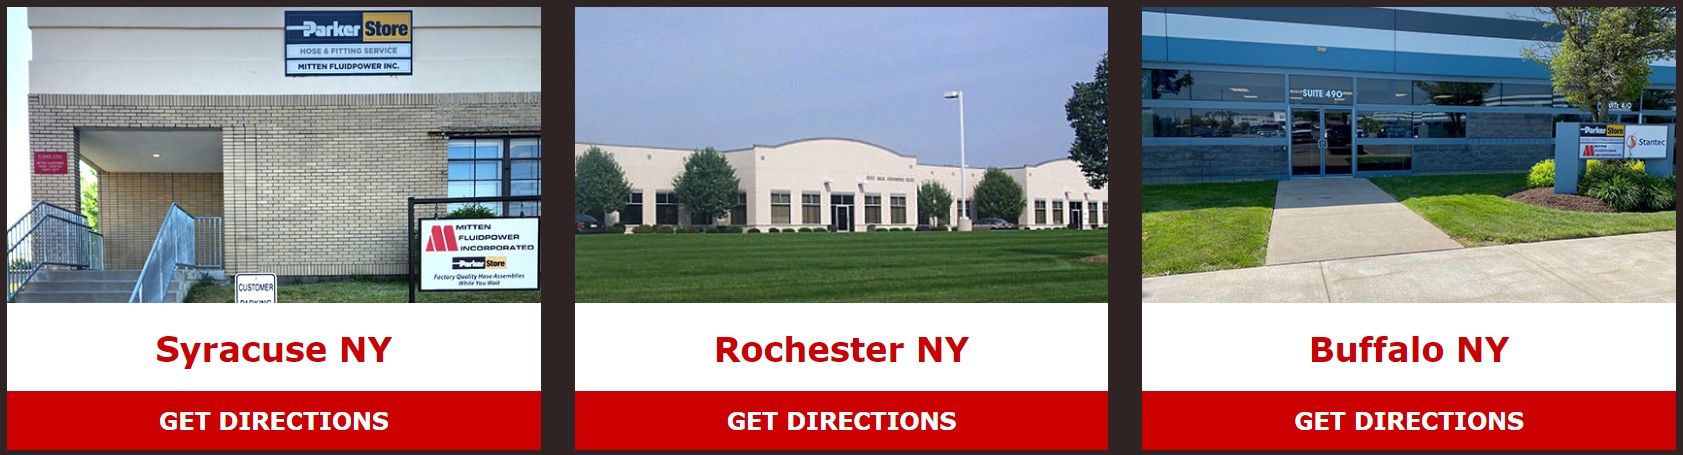 industrial website design image of local parker store locations syracuse ny get directions rochester ny get directions buffalo ny get directions